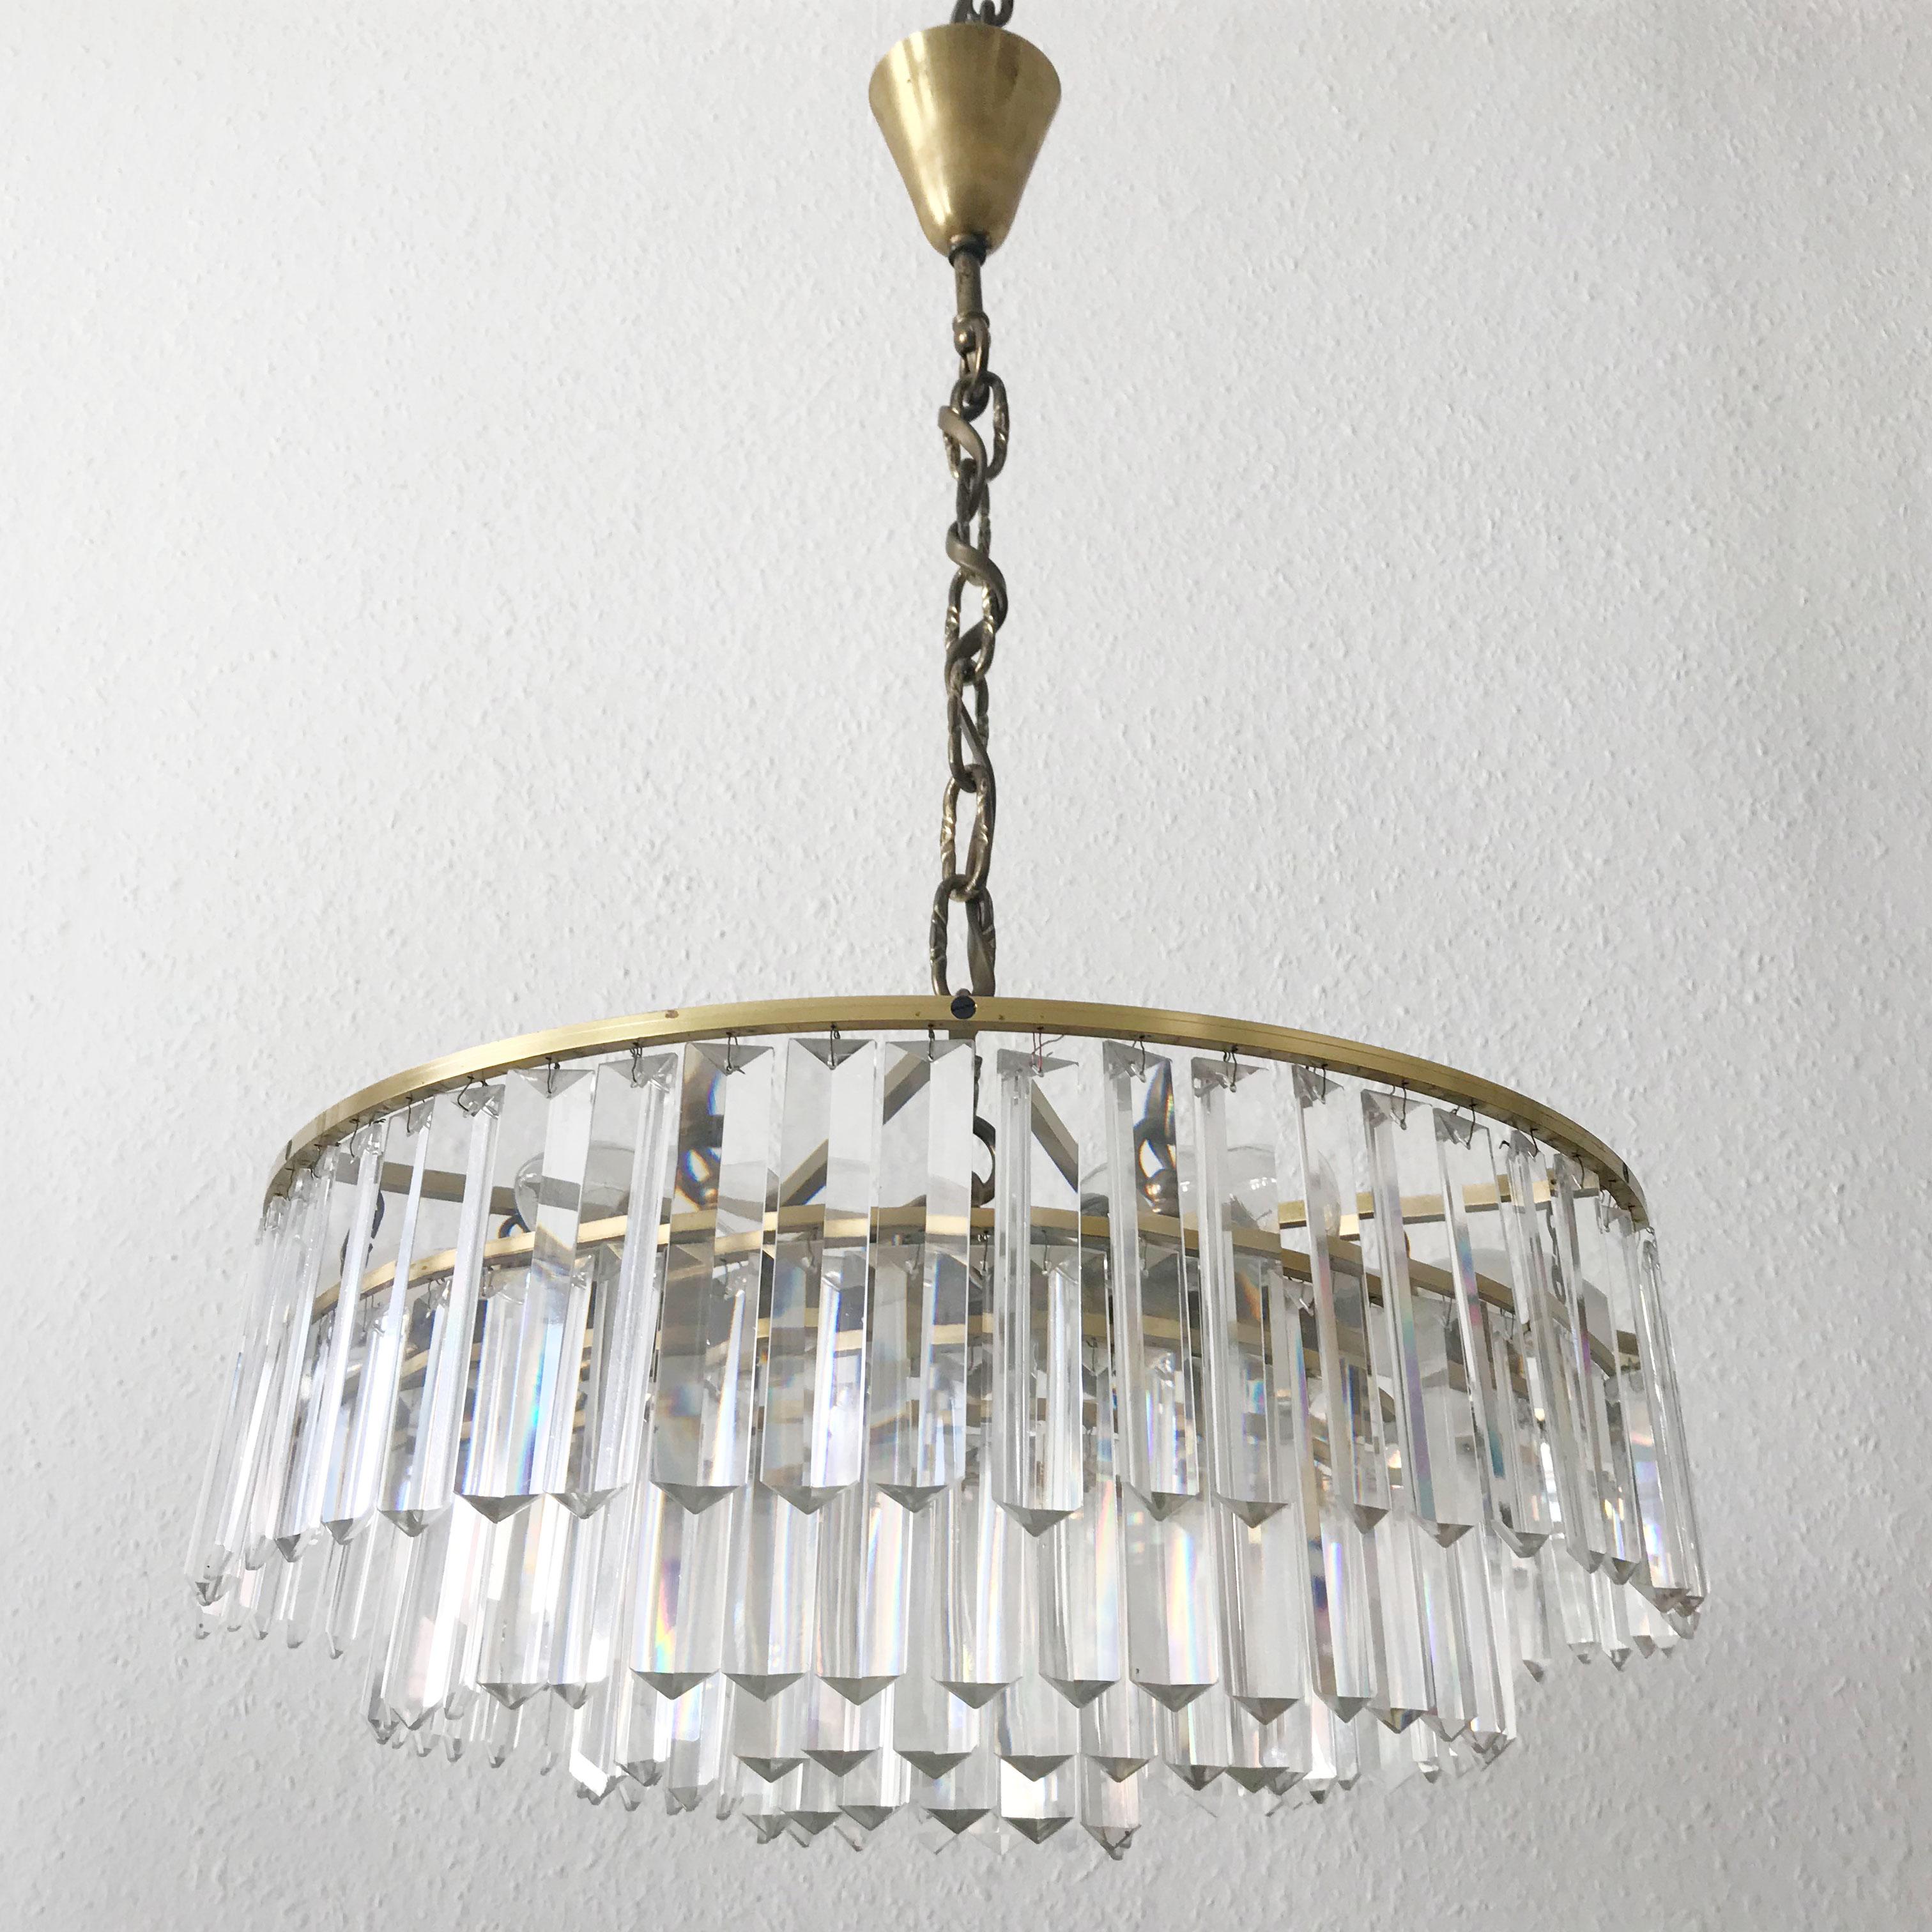 Mid-20th Century Crystal Glass Chandelier or Pendant Lamp by Bakalowits & Söhne, Vienna, 1950s For Sale